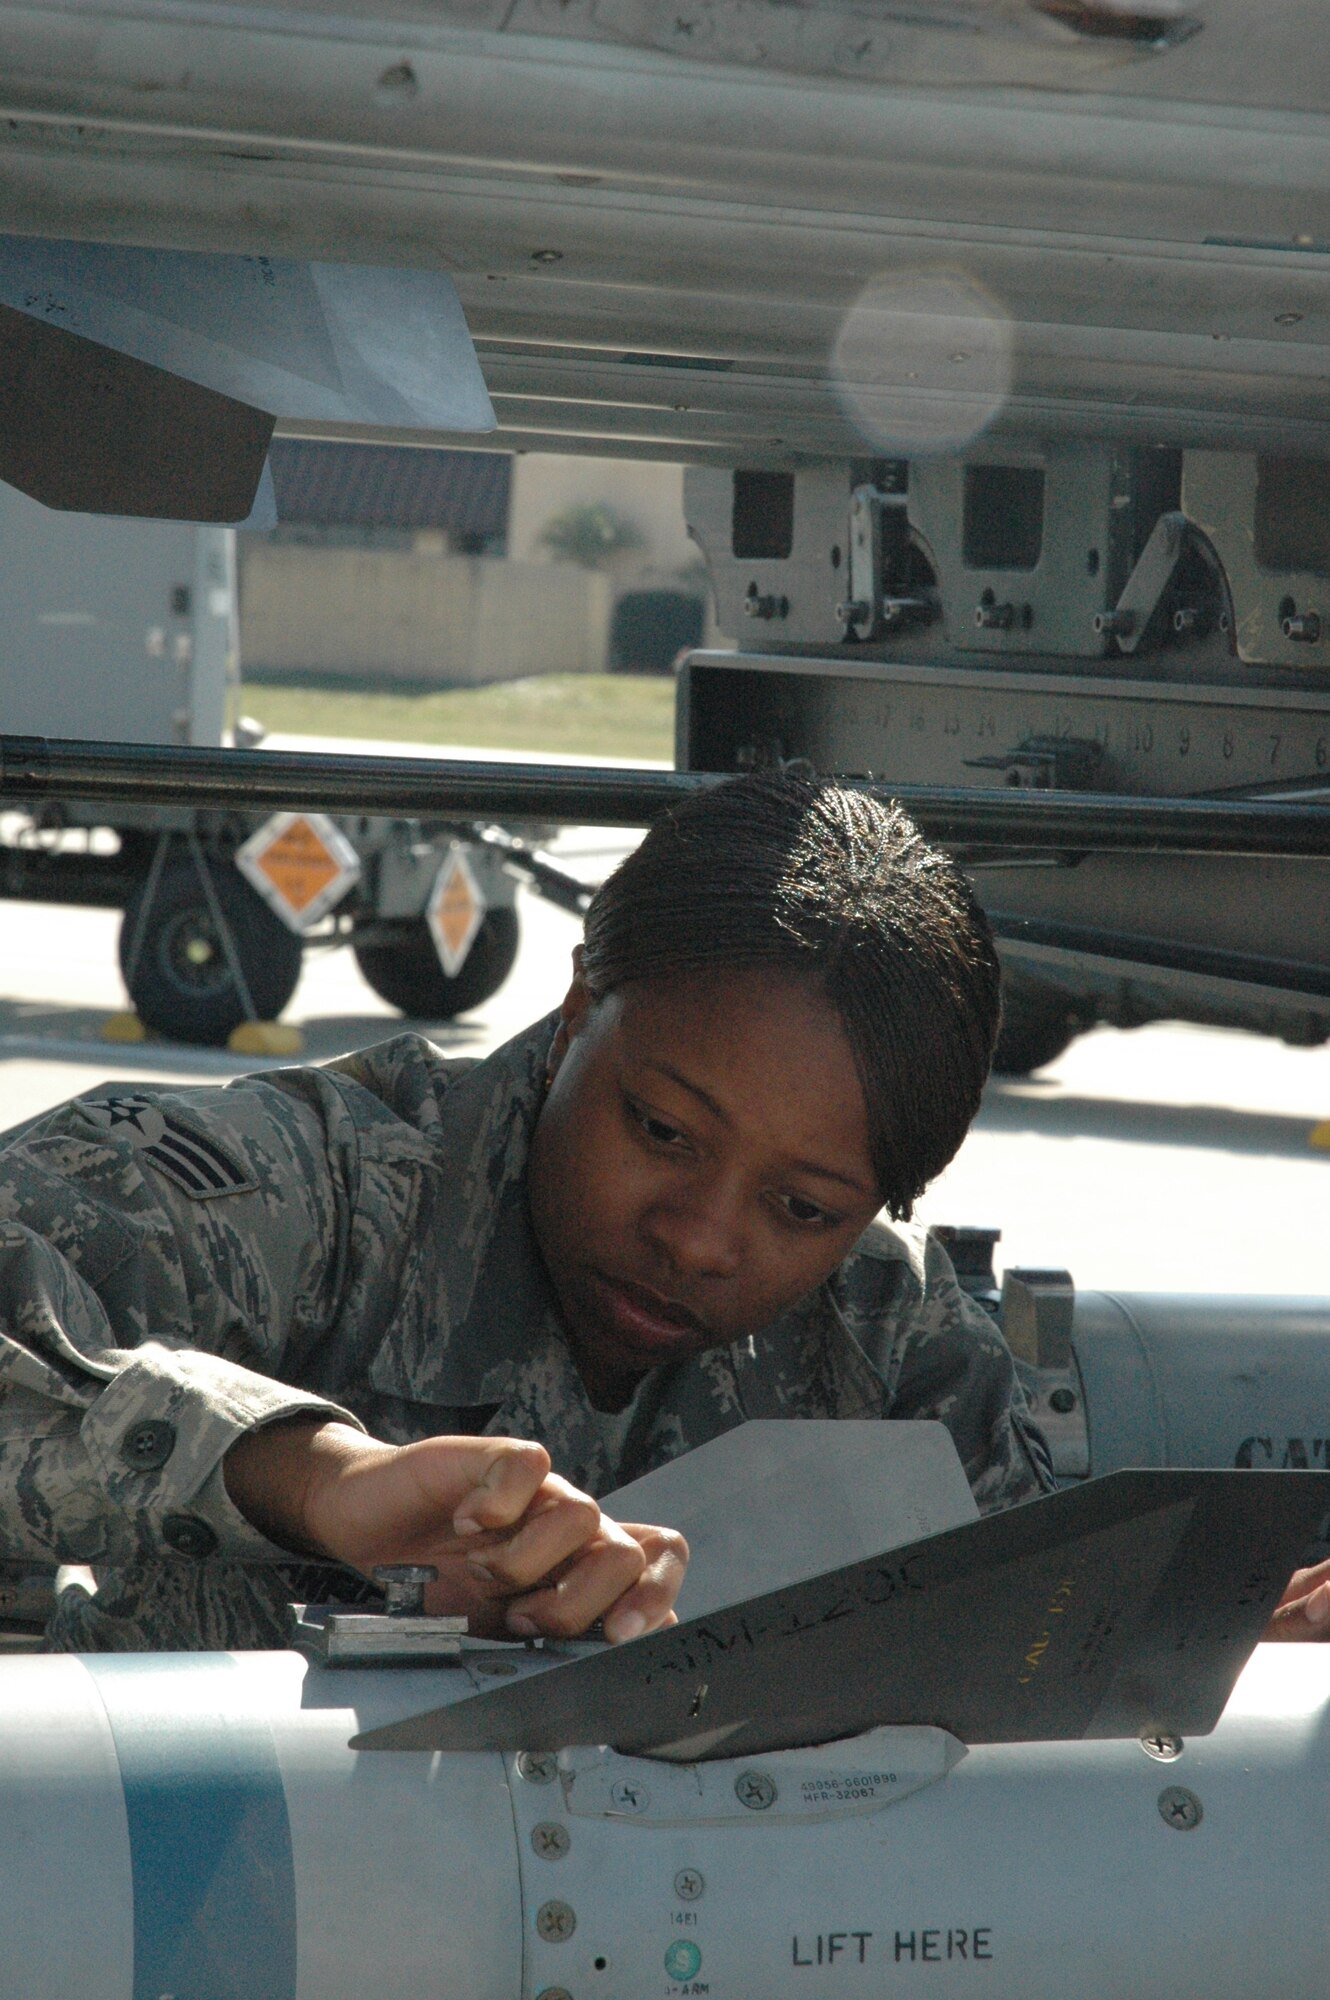 TYNDALL AIR FORCE BASE, Fla. -- Senior Airman Candace Stanfield, 58th Aircraft Maintenance Squadron armament specialist, replaces a missile on an F-15 missile trailer during a Weapons Systems Evaluation Program at Tyndall AFB, Fla.  On Feb. 16 more than 100 maintainers temporarily left the 33rd Fighter Wing at Eglin AFB, Fla., to support the two-week evaluation. (U.S. Air Force photo/Airman First Class Veronica McMahon)